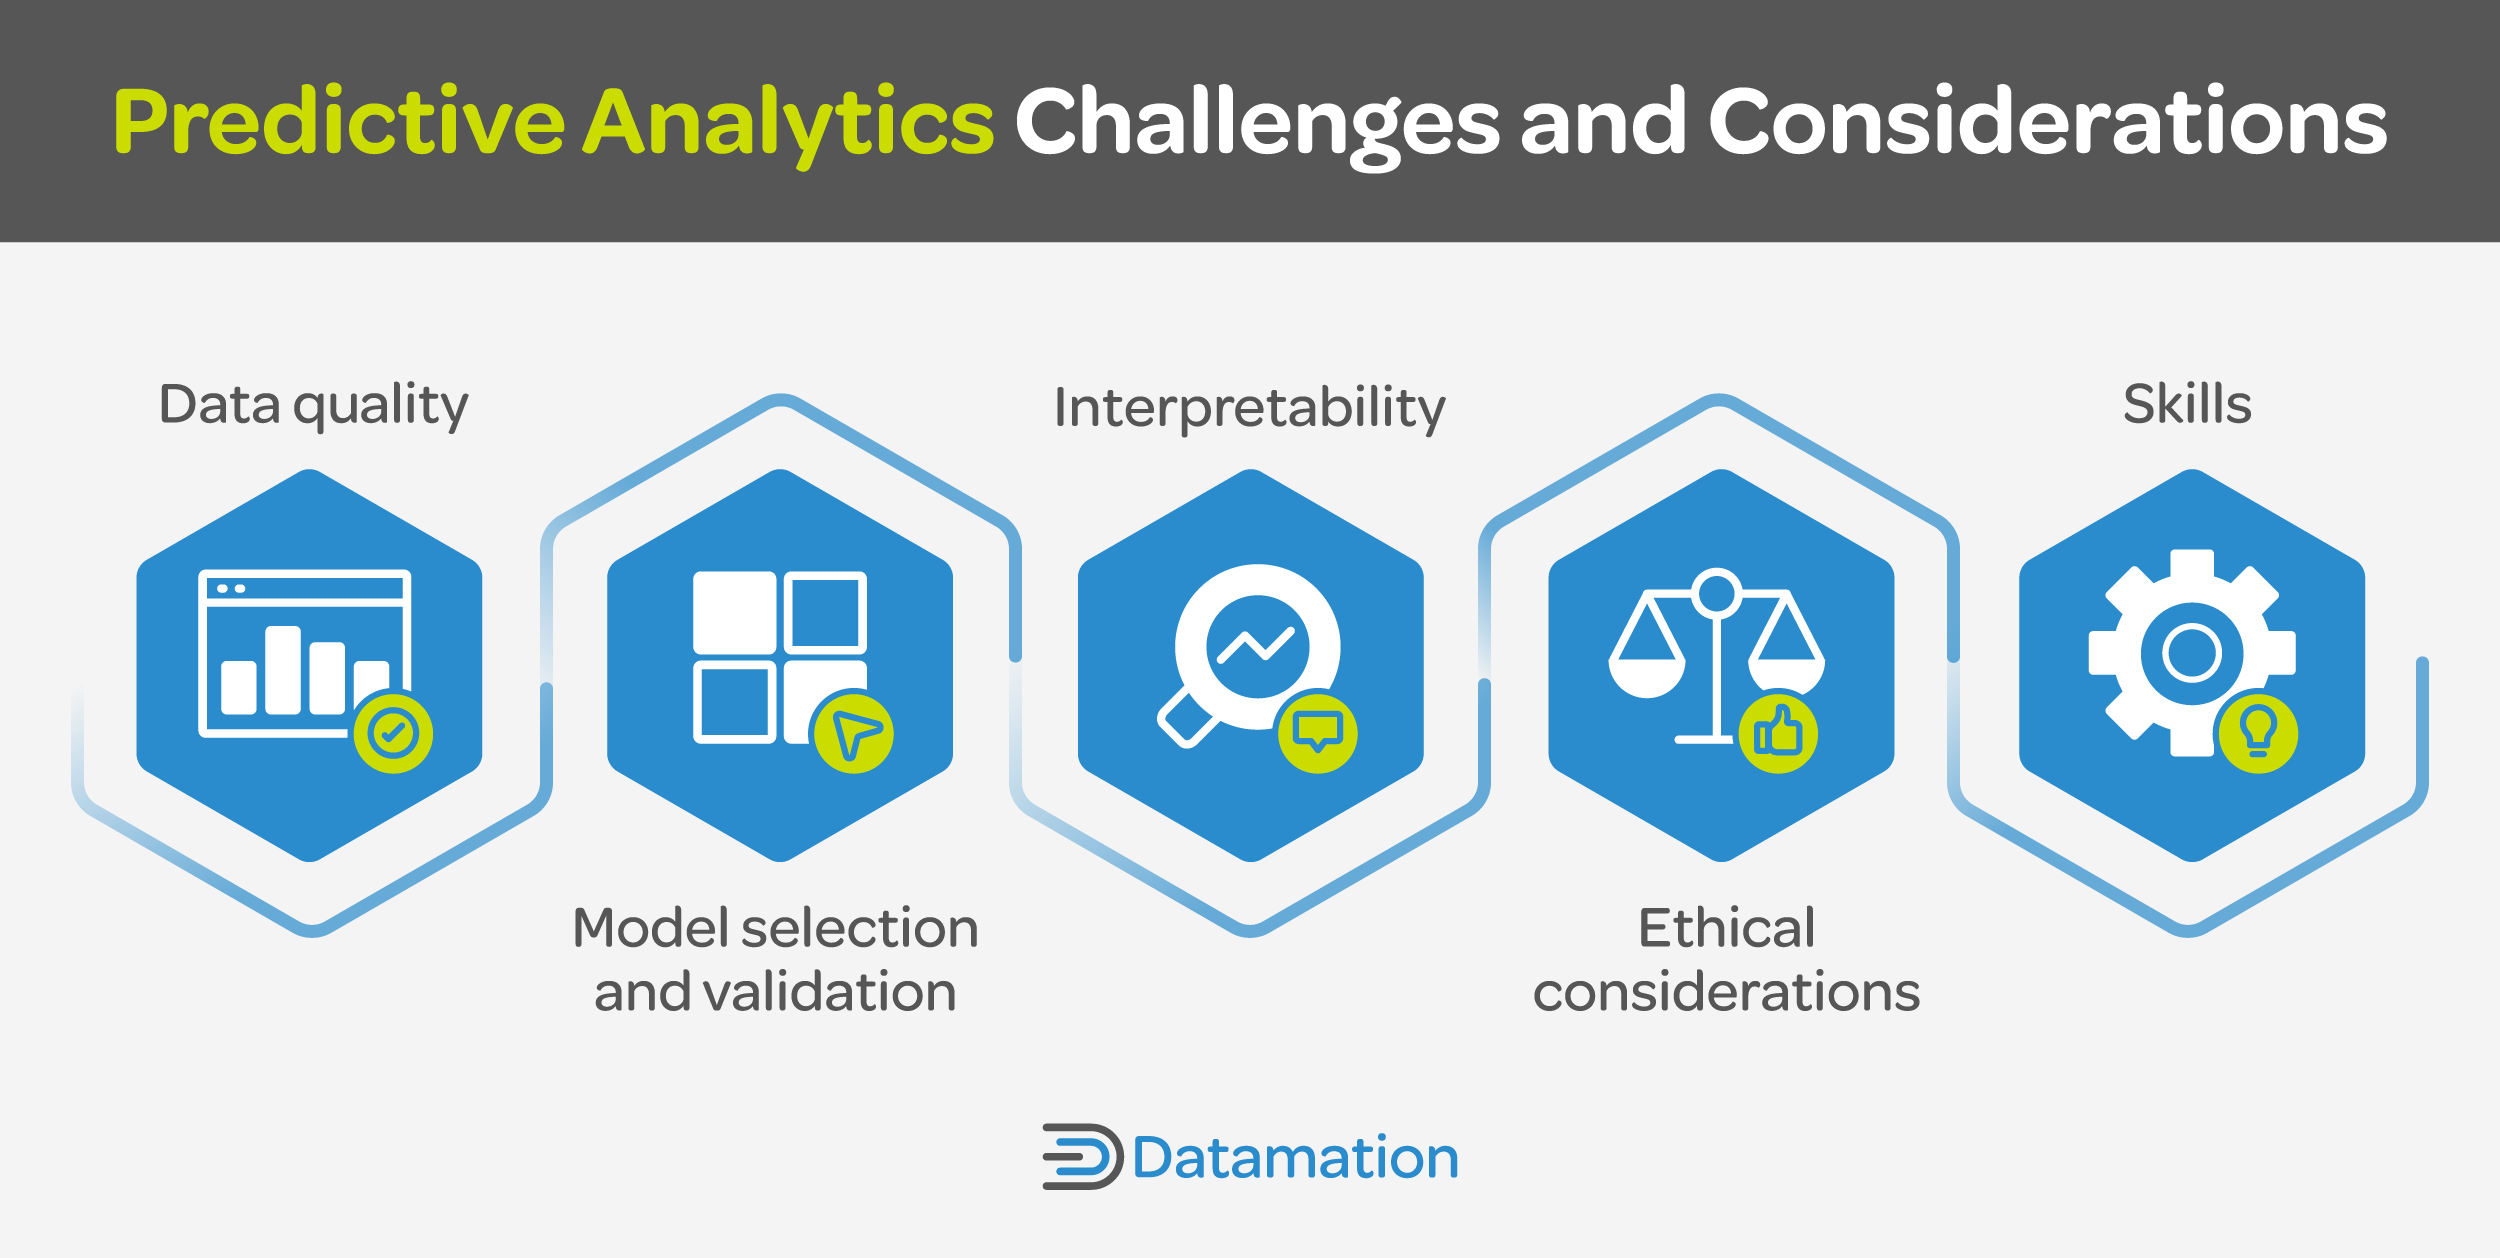 Predictive analytics challenges and considerations